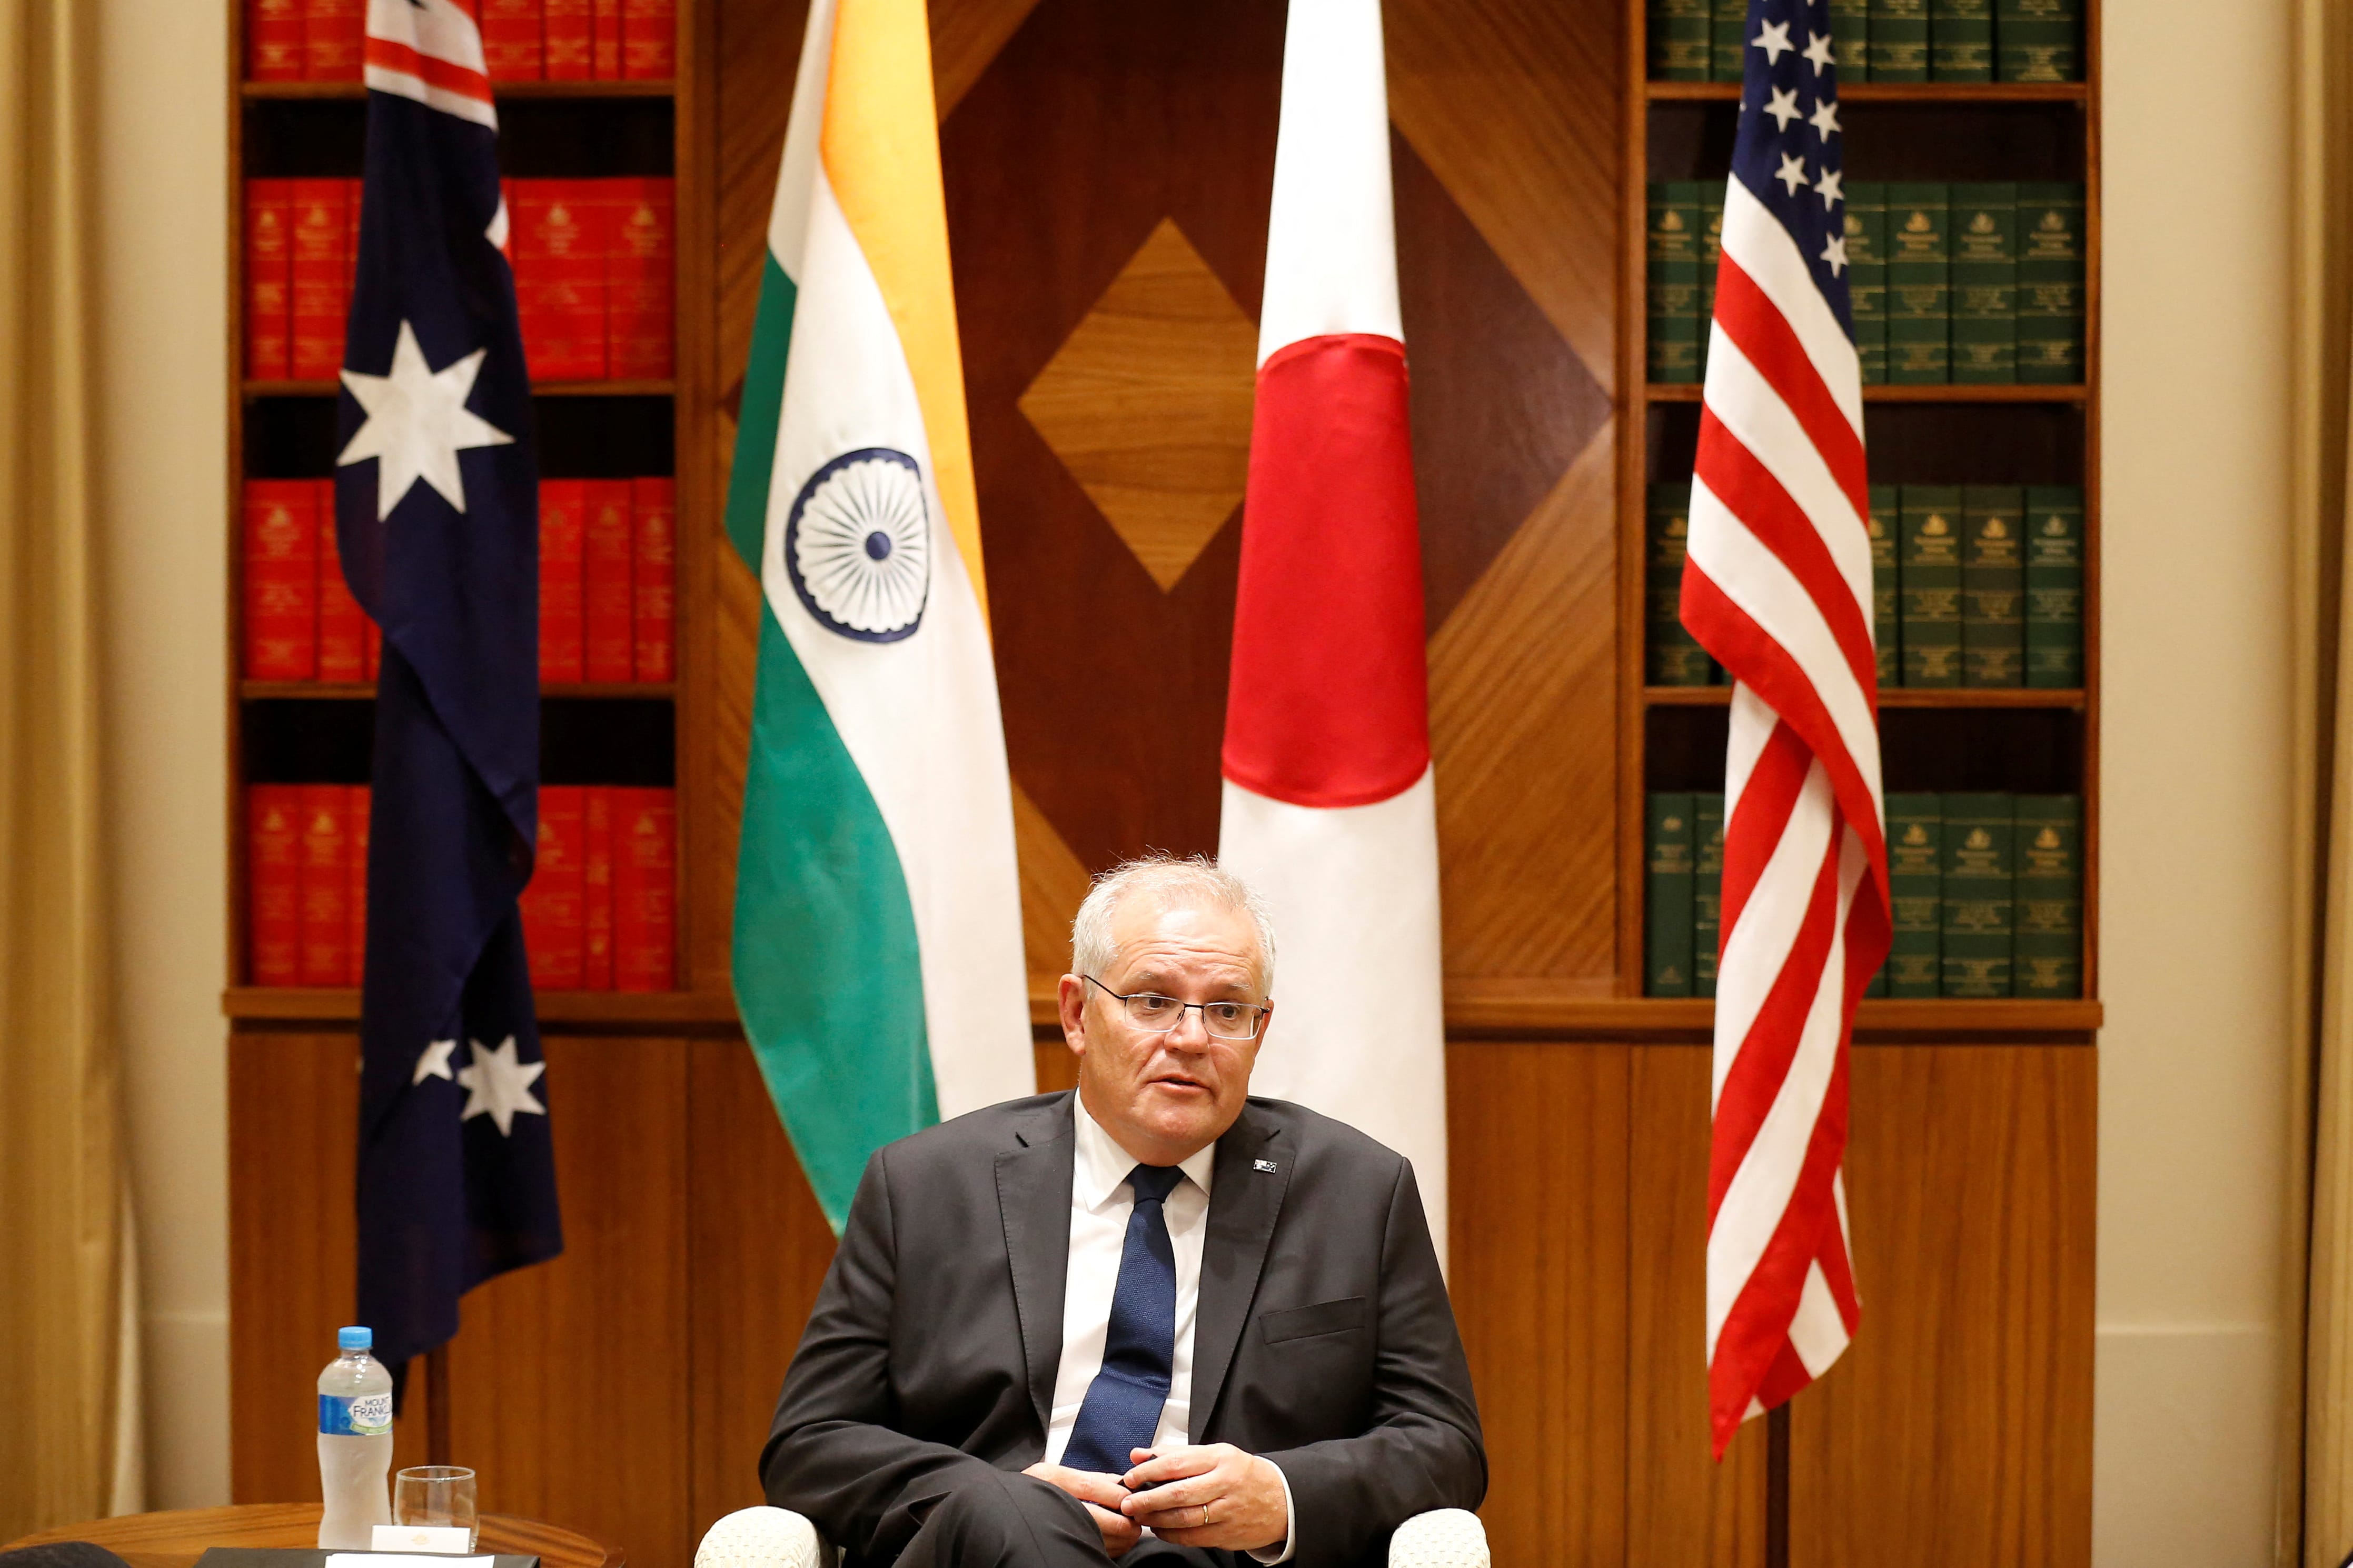 Australian Prime Minister Scott Morrison speaks to the media at the Commonwealth Parliament Office in Melbourne, in Melbourne, Australia, February 11, 2022. Darrian Traynor/Pool via REUTERS